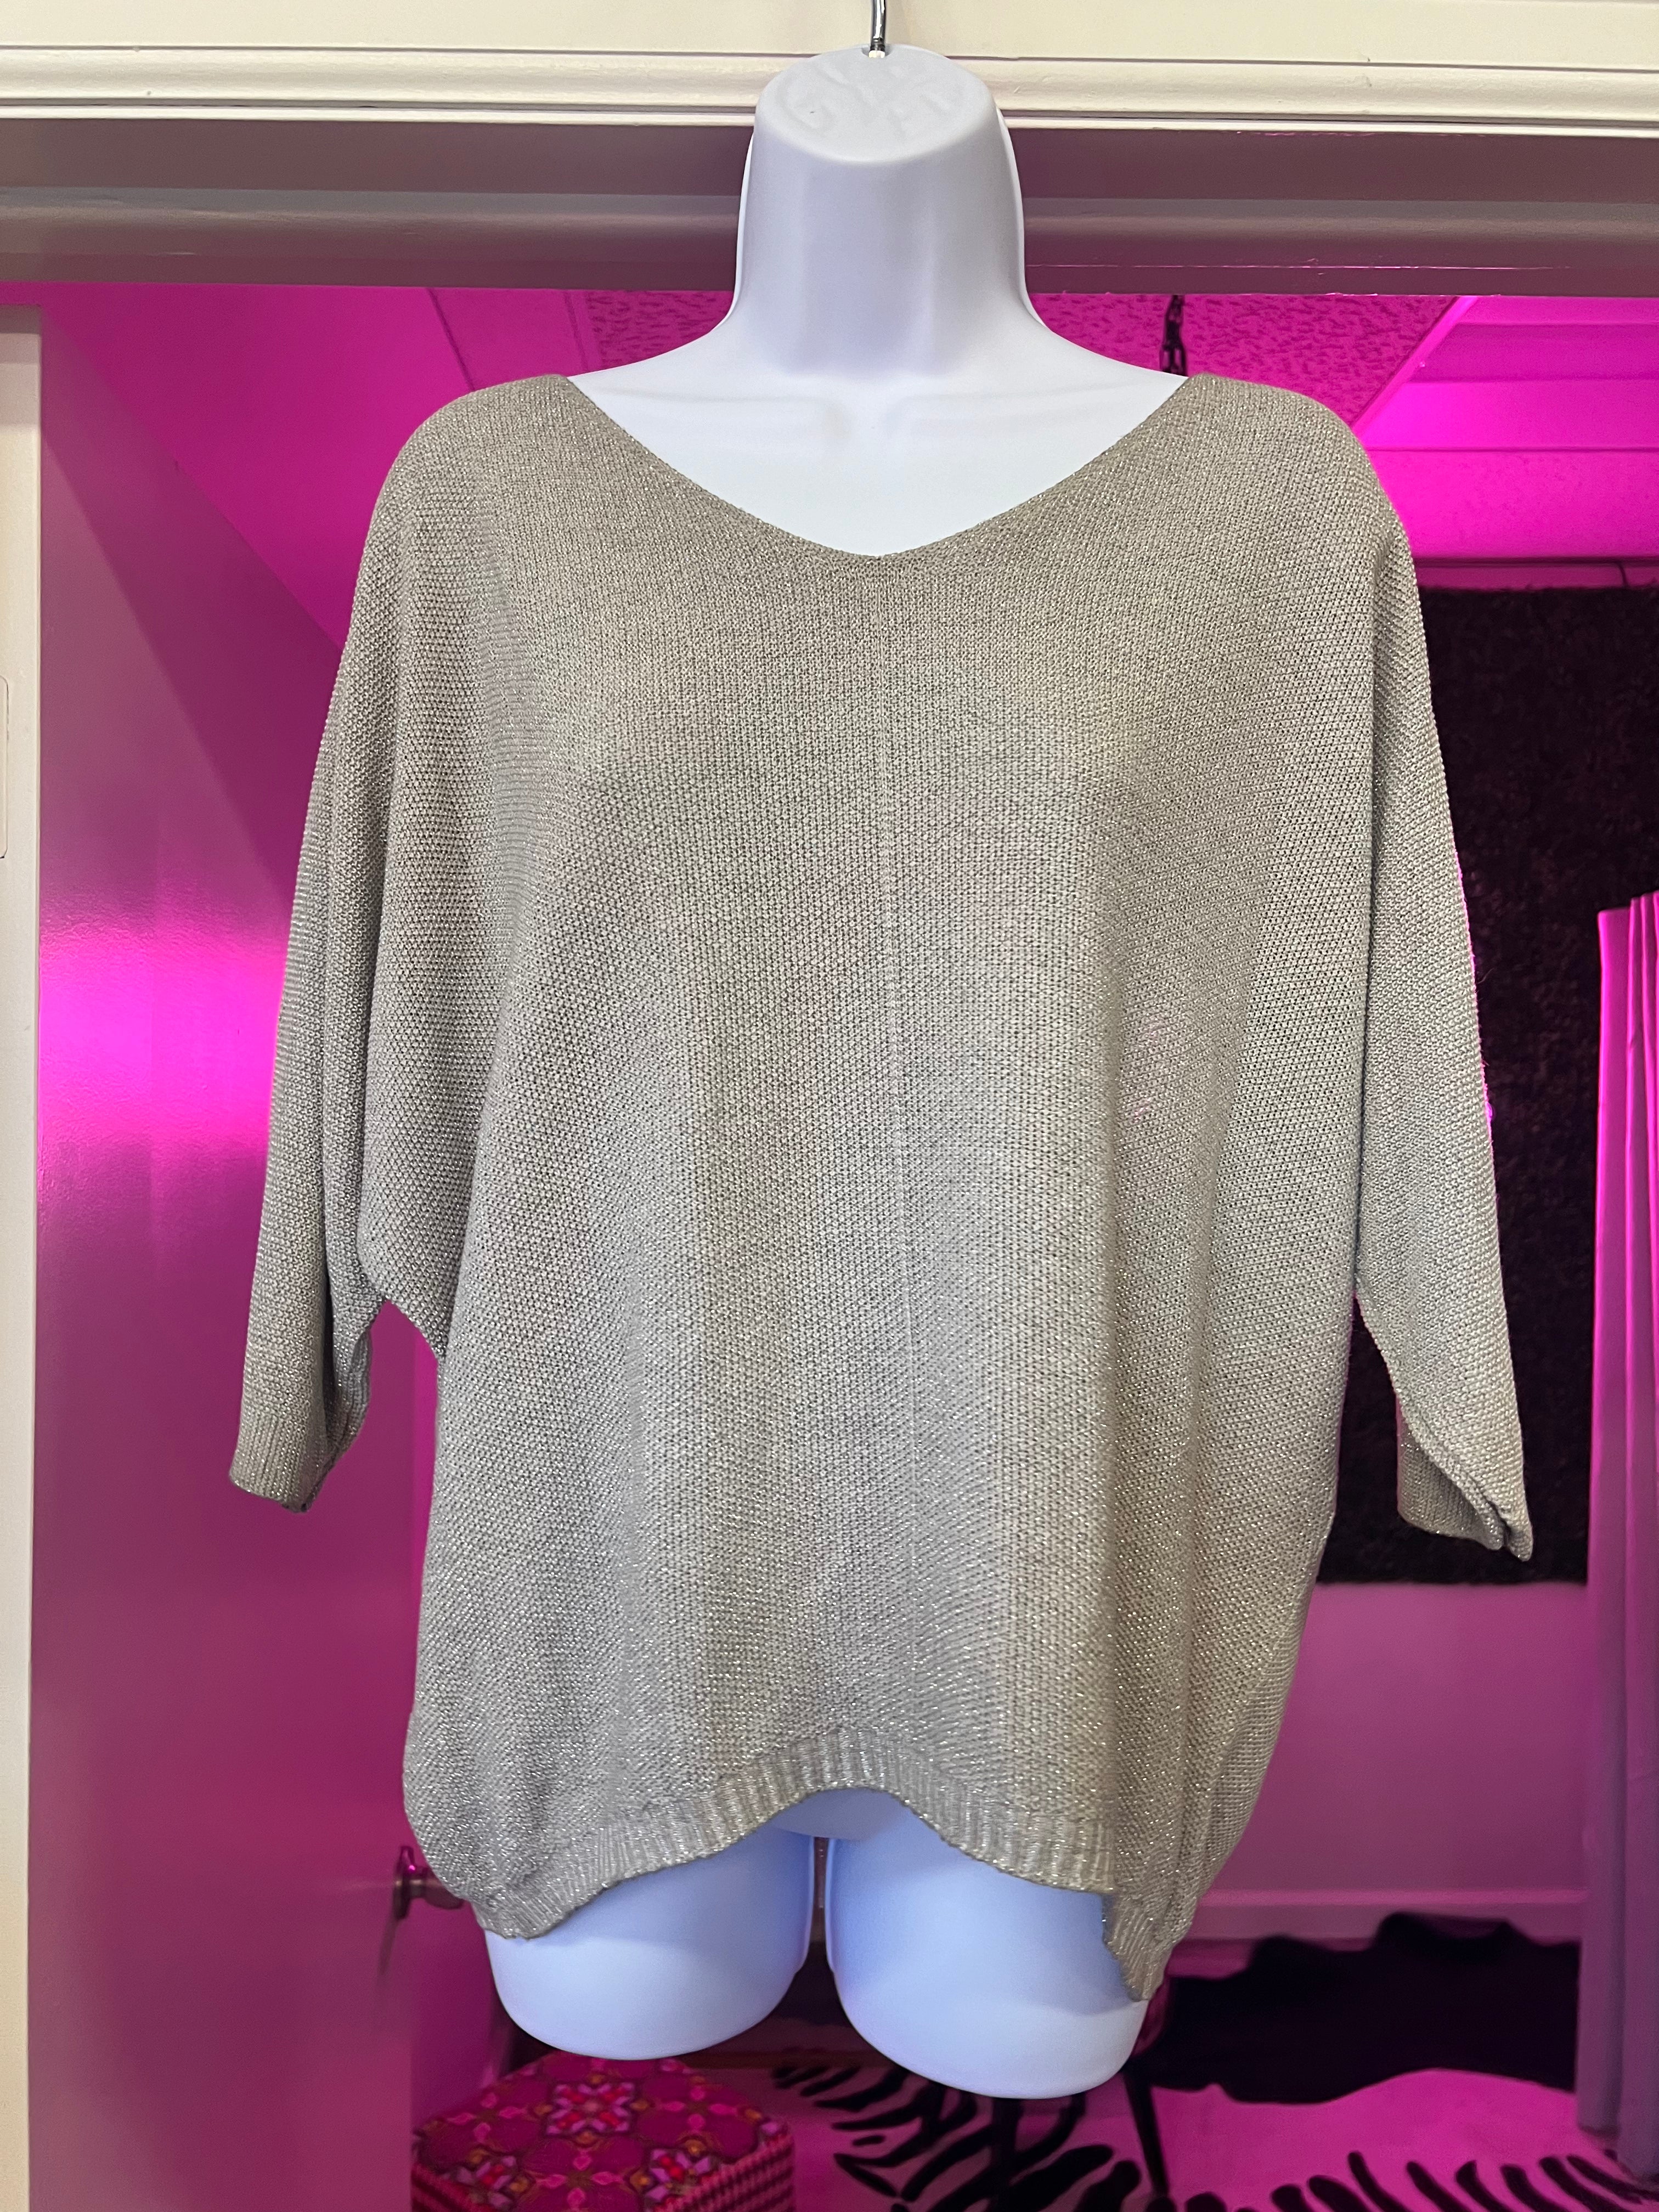 SPARKLY LURI SWEATER BY SCANDAL ITALY